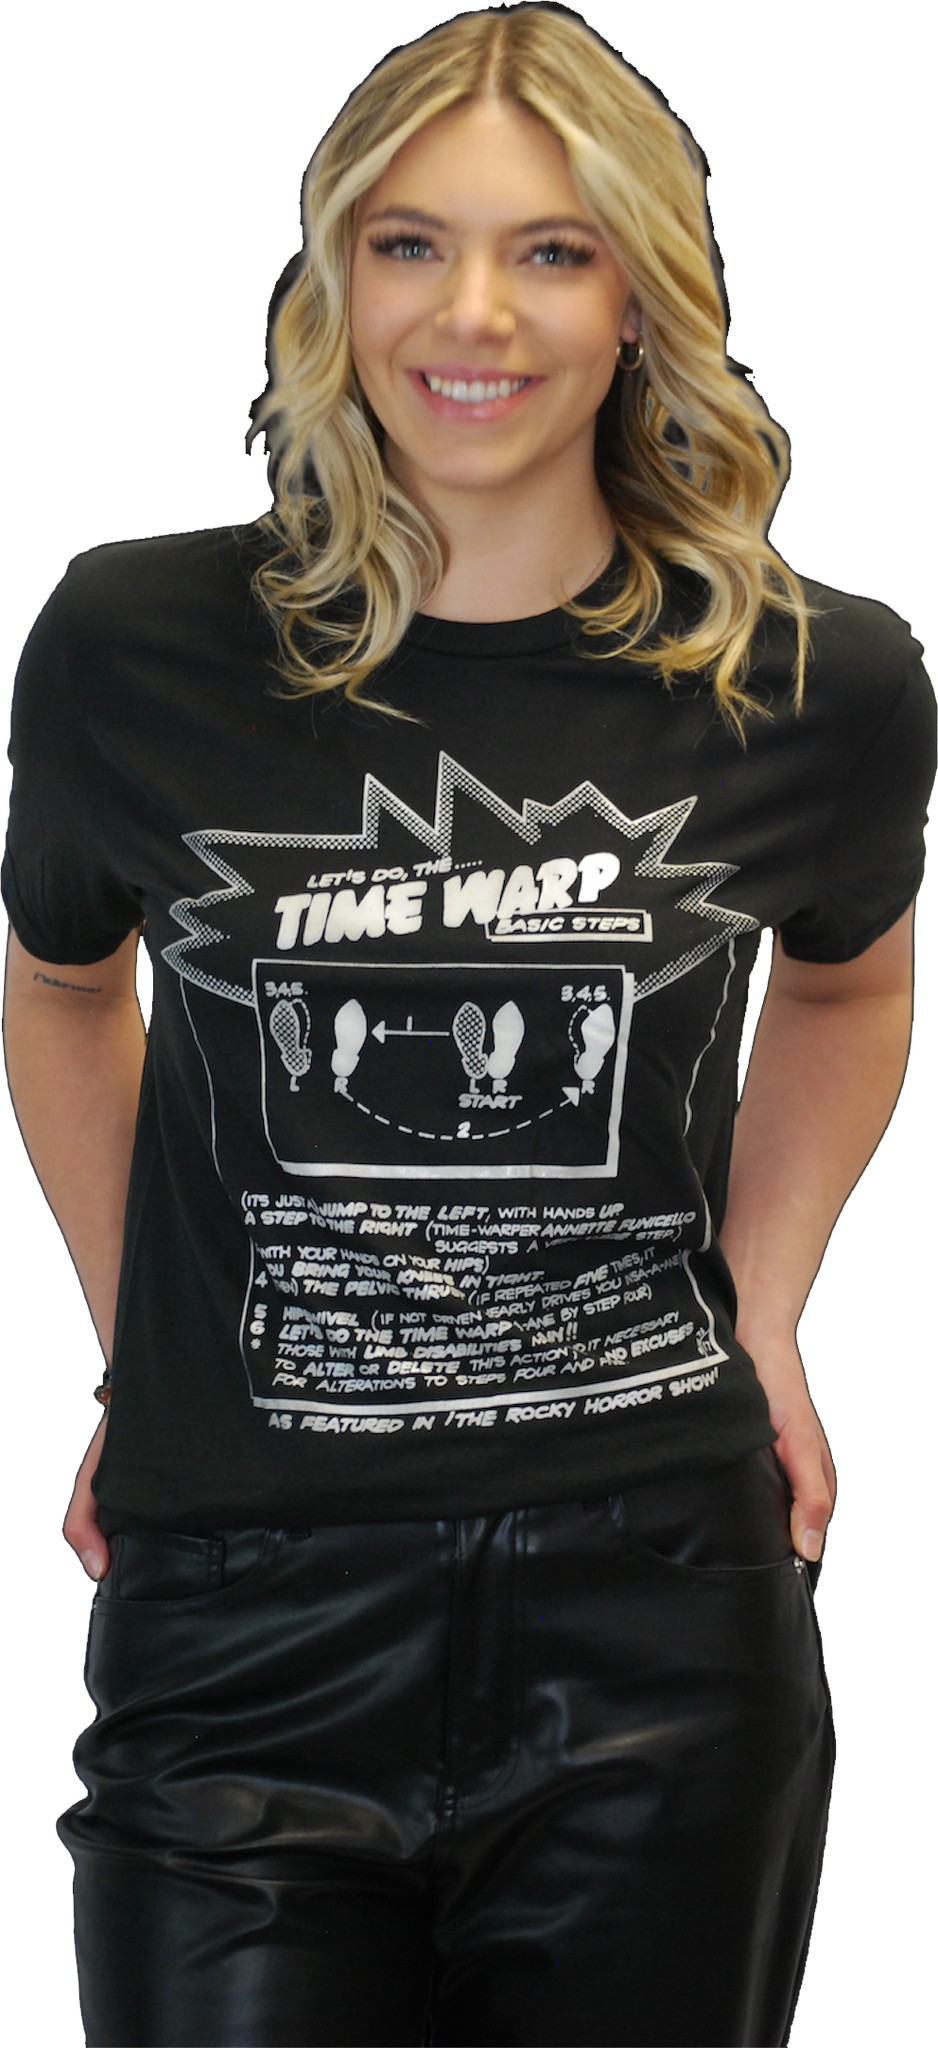 ROCKY HORROR PICTURE SHOW "TIME WARP" LIMITED EDITION GLOW IN THE DARK T-SHIRT